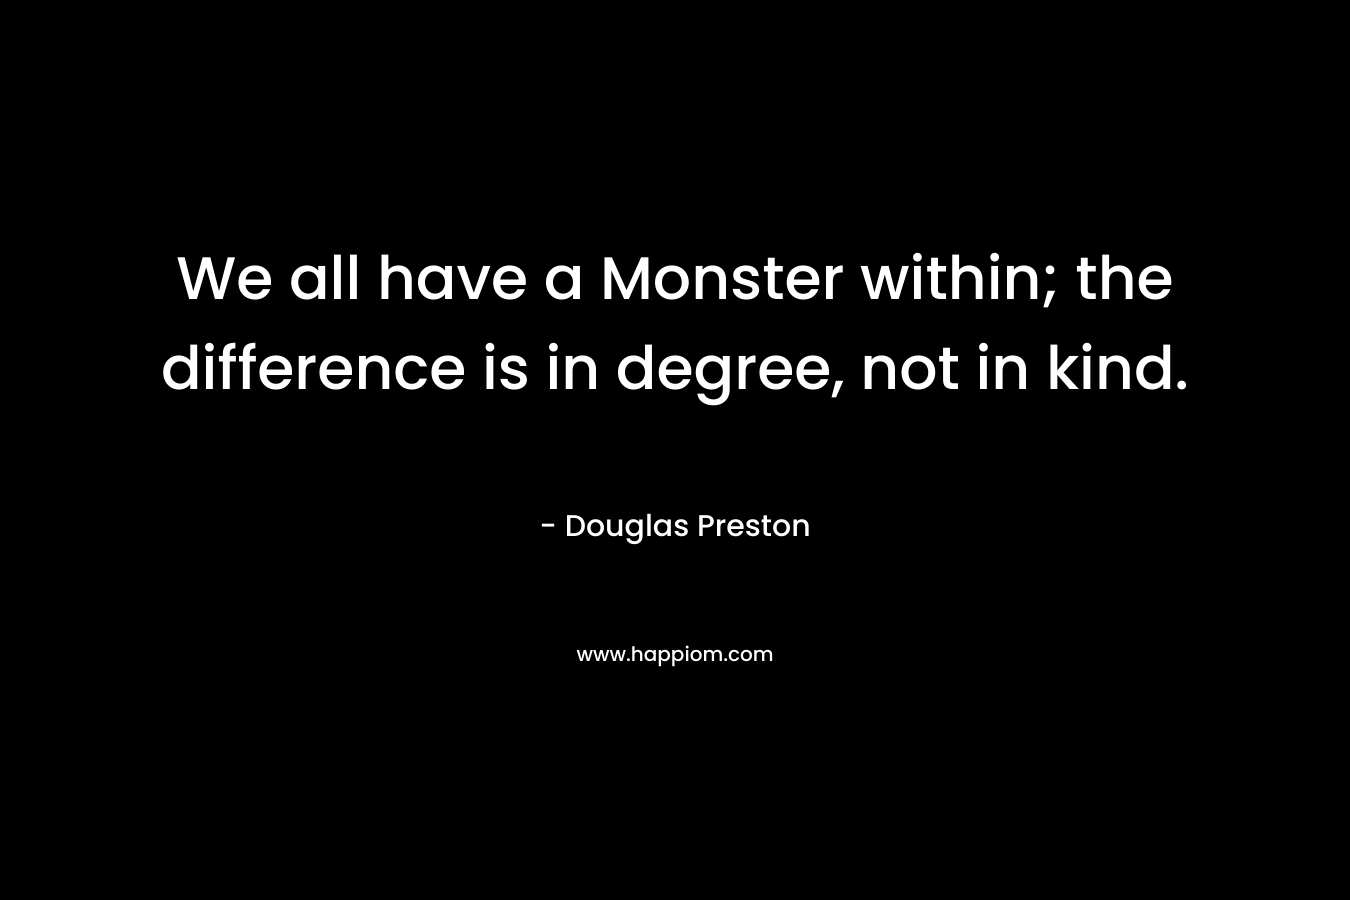 We all have a Monster within; the difference is in degree, not in kind.